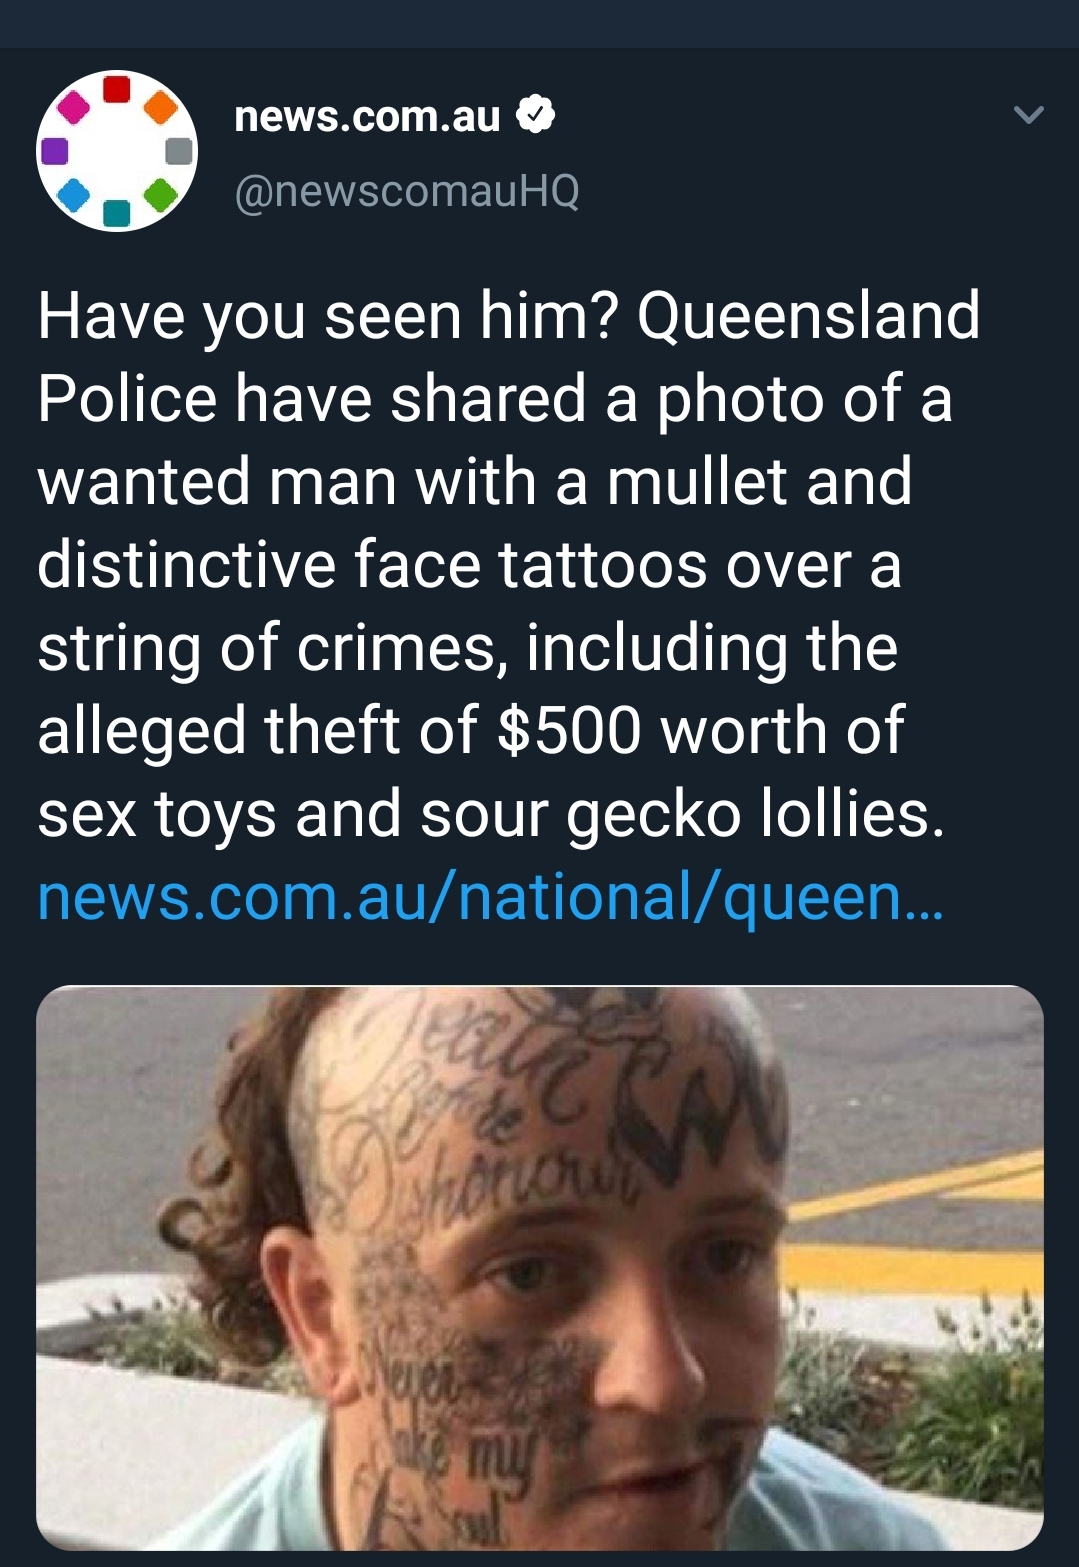 photo caption - news.com.au Have you seen him? Queensland, Police have d a photo of a wanted man with a mullet and distinctive face tattoos over a string of crimes, including the alleged theft of $500 worth of sex toys and sour gecko lollies. news.com.aun